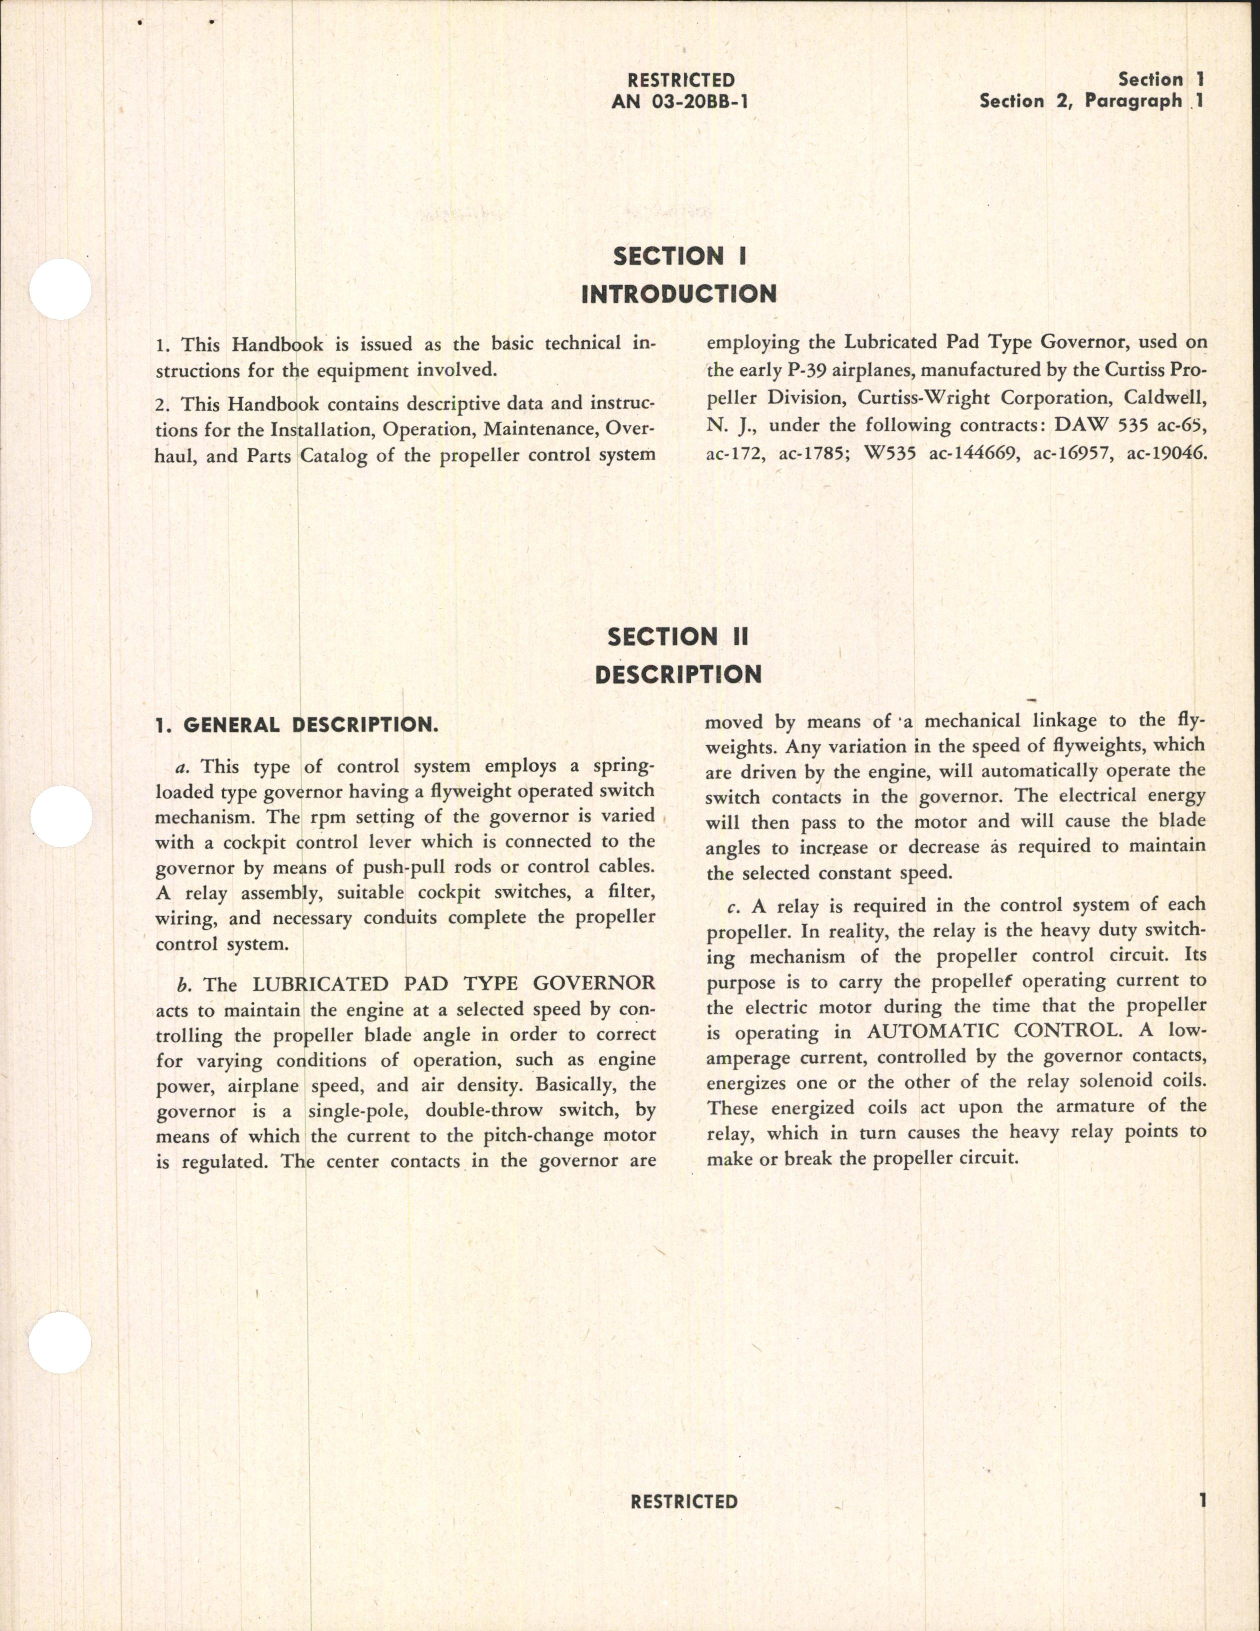 Sample page 5 from AirCorps Library document: Handbook of Instructions with Parts Catalog for Lubricated Pad Type Governor